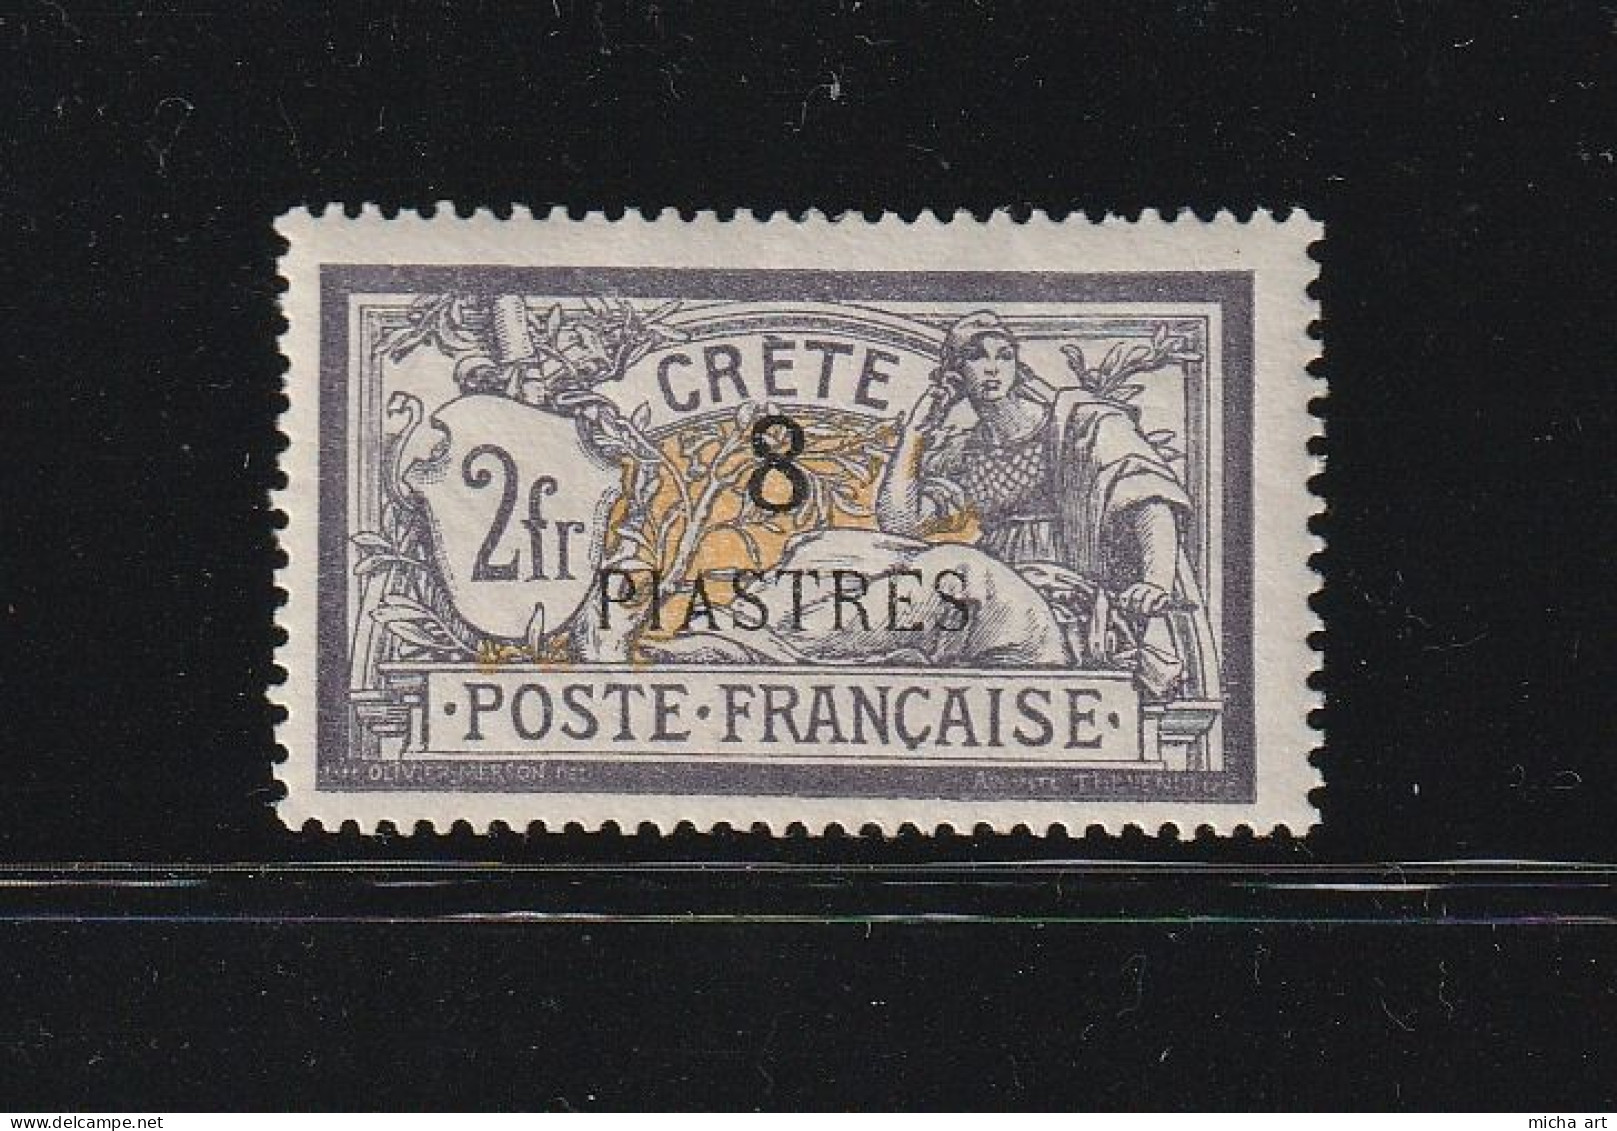 Greece Crete French Post Office 1903 Surcharged Crete Issue 8 Pi / 2 Fr. MH W1097 - Unused Stamps